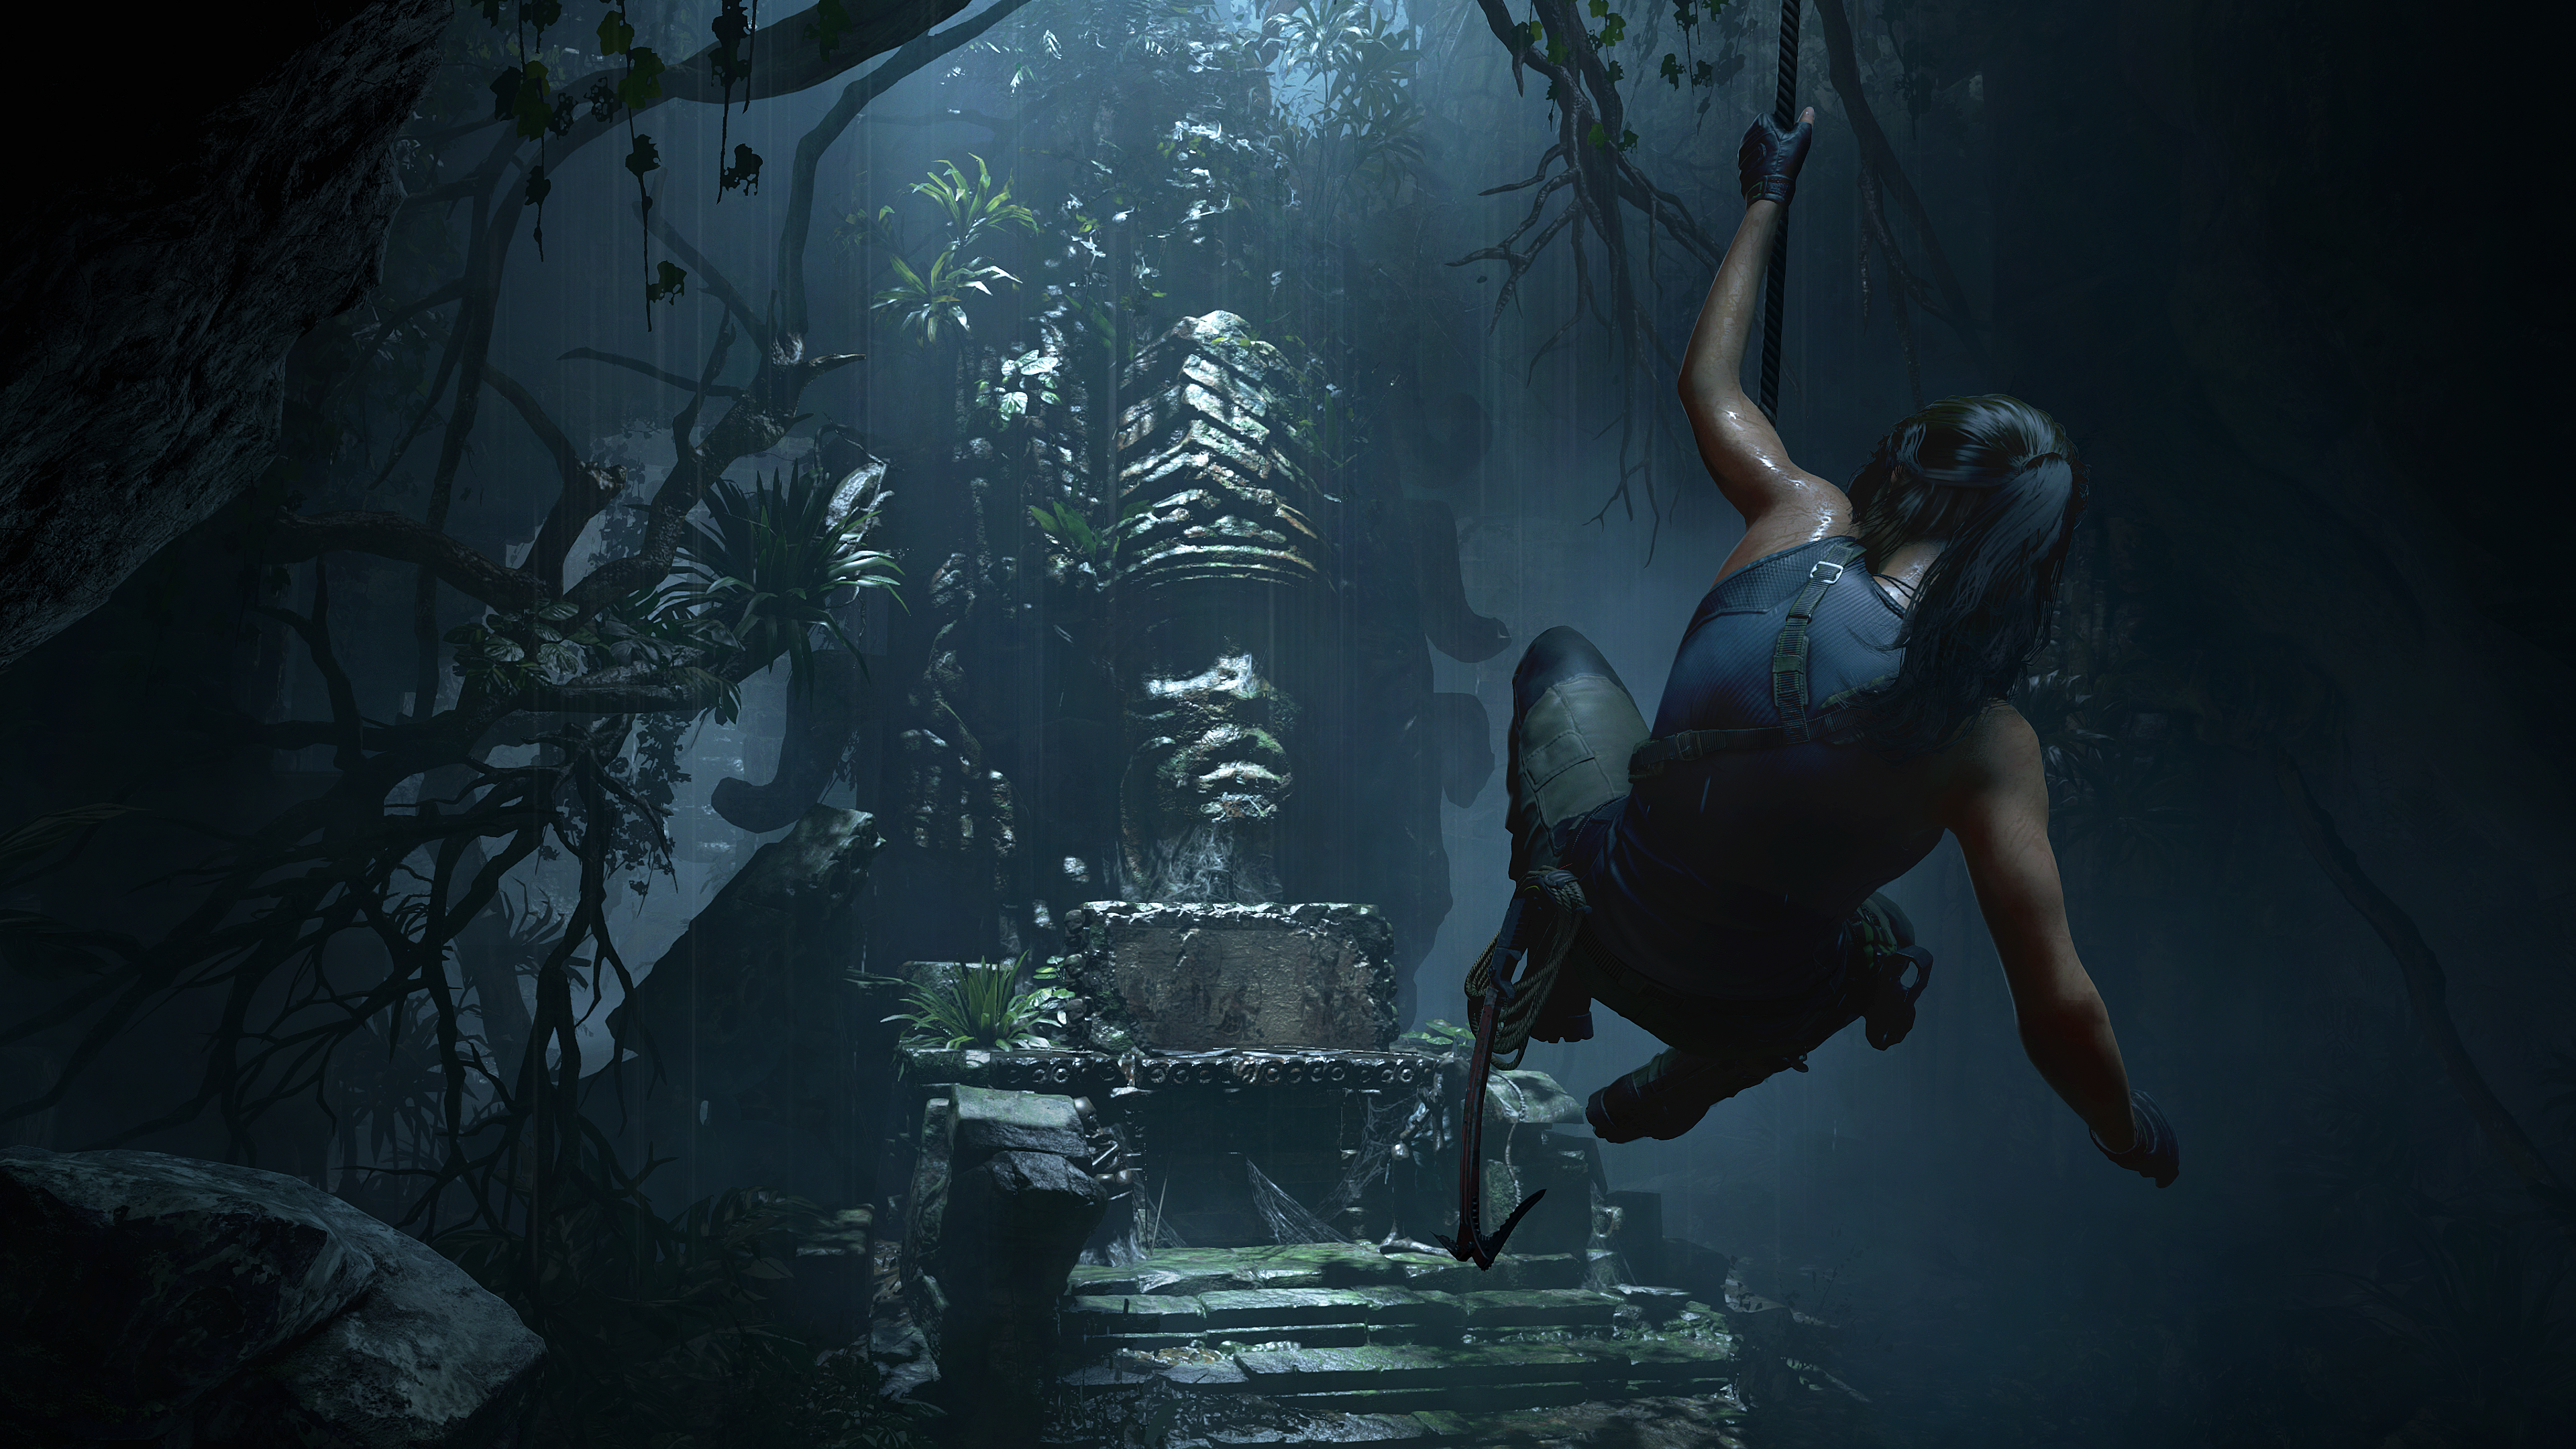 Media asset in full size related to 3dfxzone.it news item entitled as follows: Nuovi gameplay trailers e screenshots del game Shadow of the Tomb Raider | Image Name: news28511_Shadow-of-the-Tomb-Raider-Screenshot_1.jpg